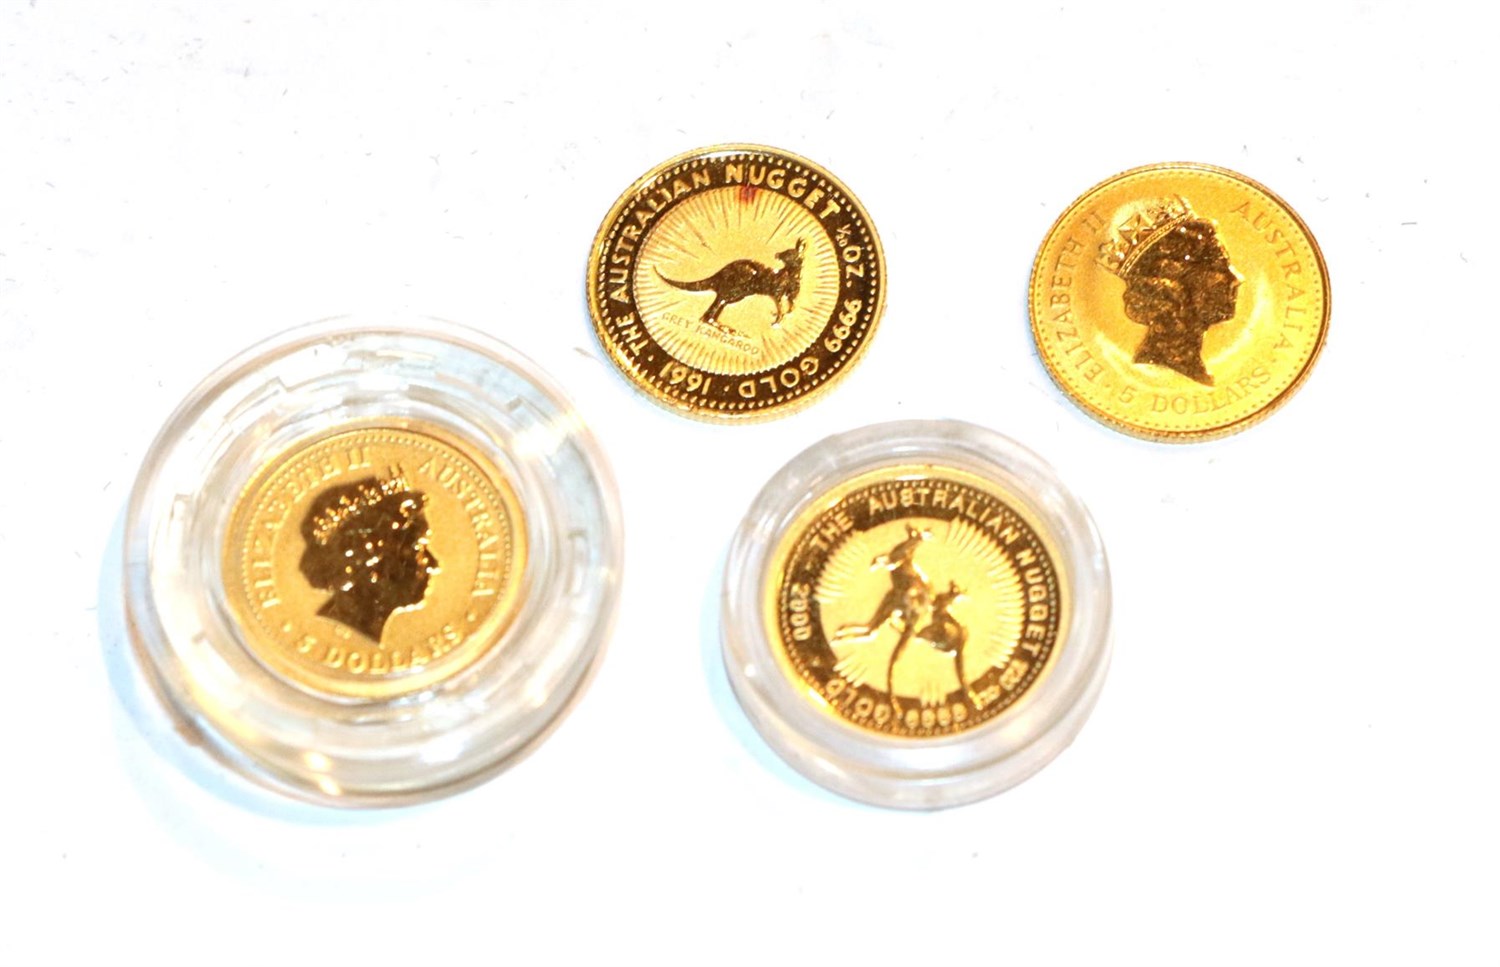 Lot 124 - 4 x Australia, $5, 1/20 oz .9999 Gold Coins featuring the 1990, 1991, 2000, and 2001 kangaroo...